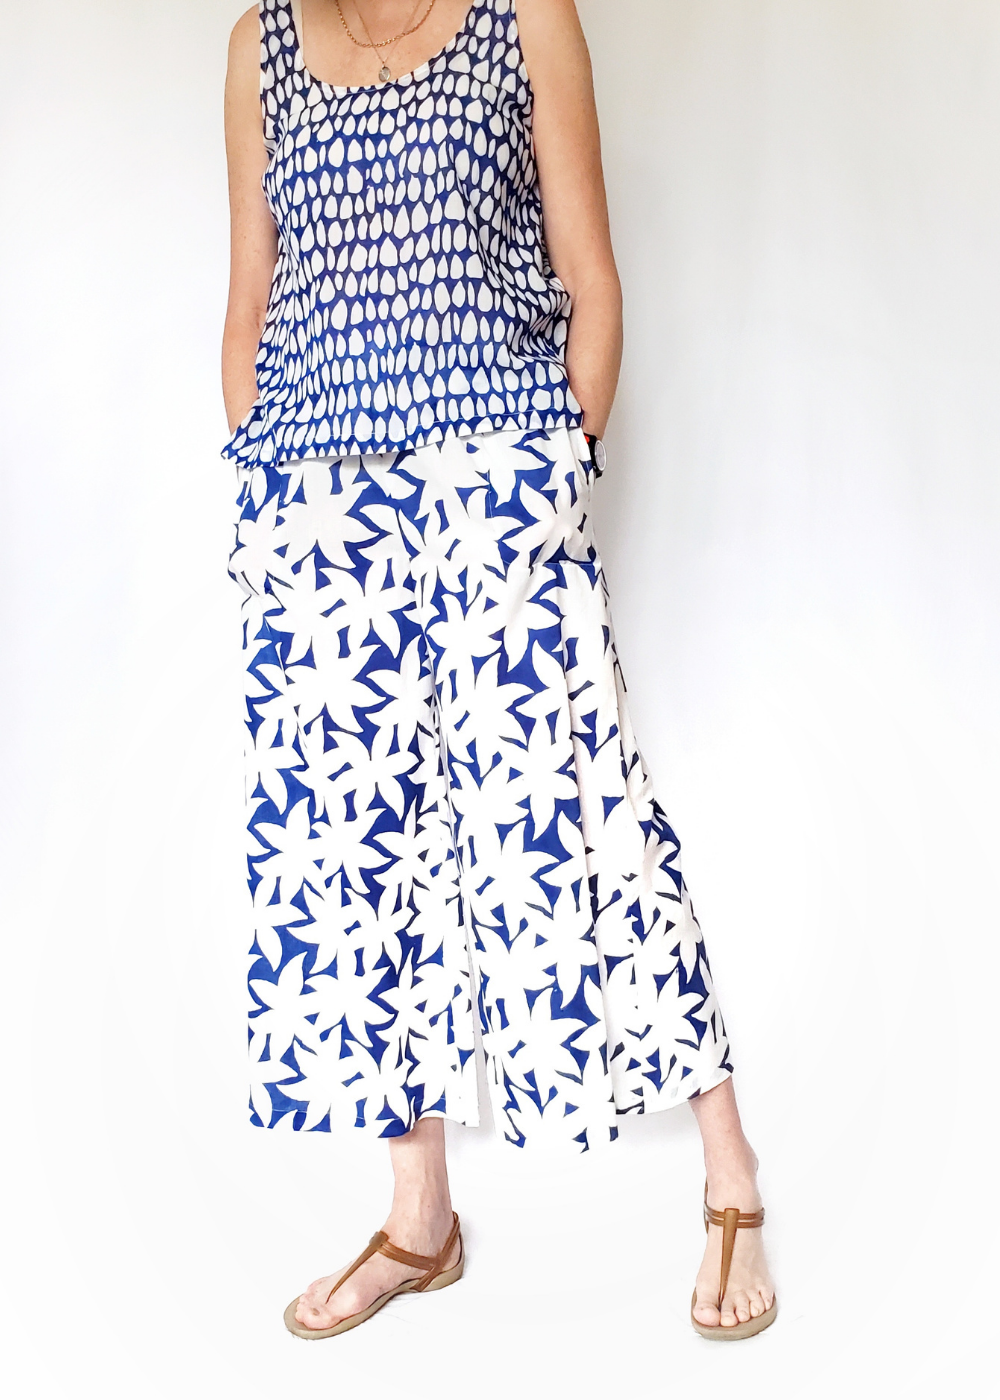 Sale Price ALEXI FLARE PANT in MYSORE SHADOW blue and white print cotton